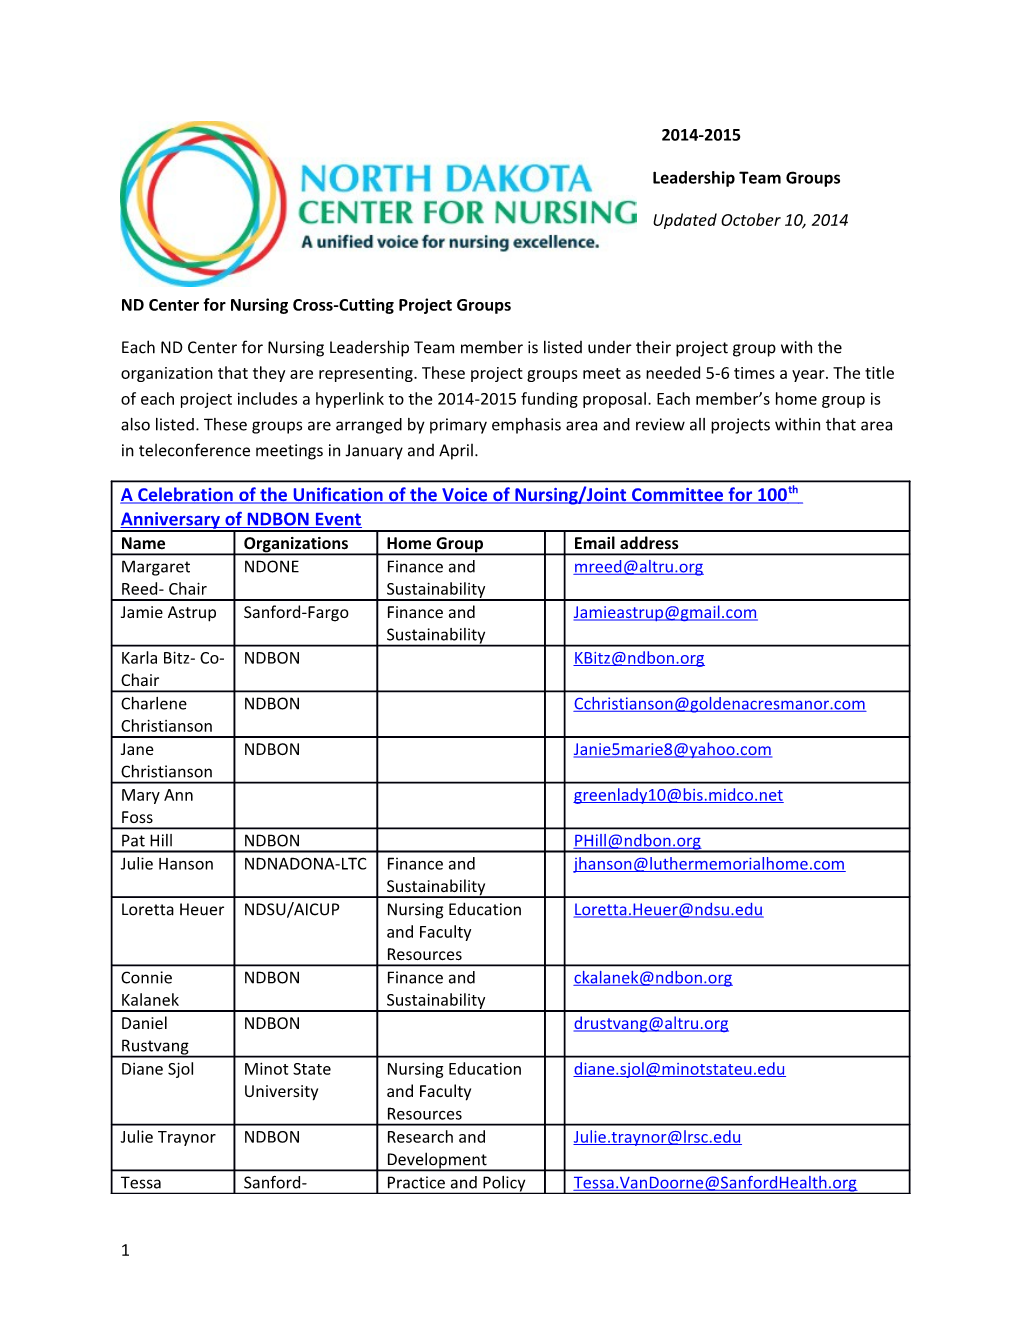 ND Center for Nursing Cross-Cutting Project Groups s1